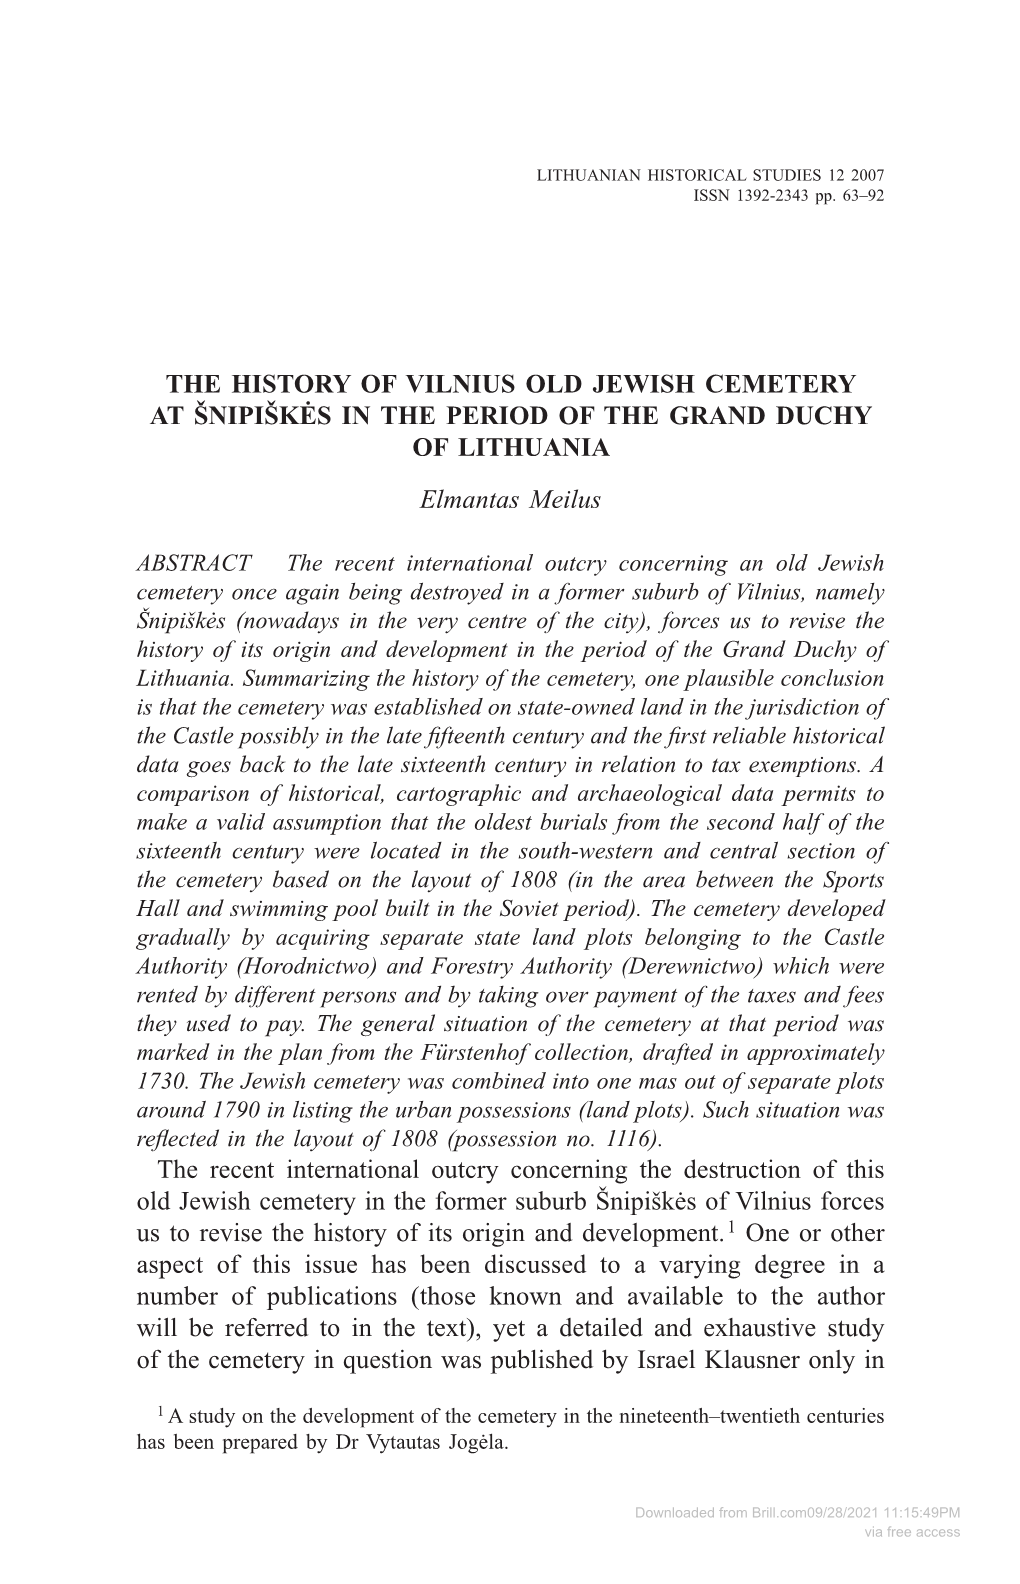 The History of Vilnius Old Jewish Cemetery at Šnipiškės in the Period of the Grand Duchy of Lithuania Elmantas Meilus